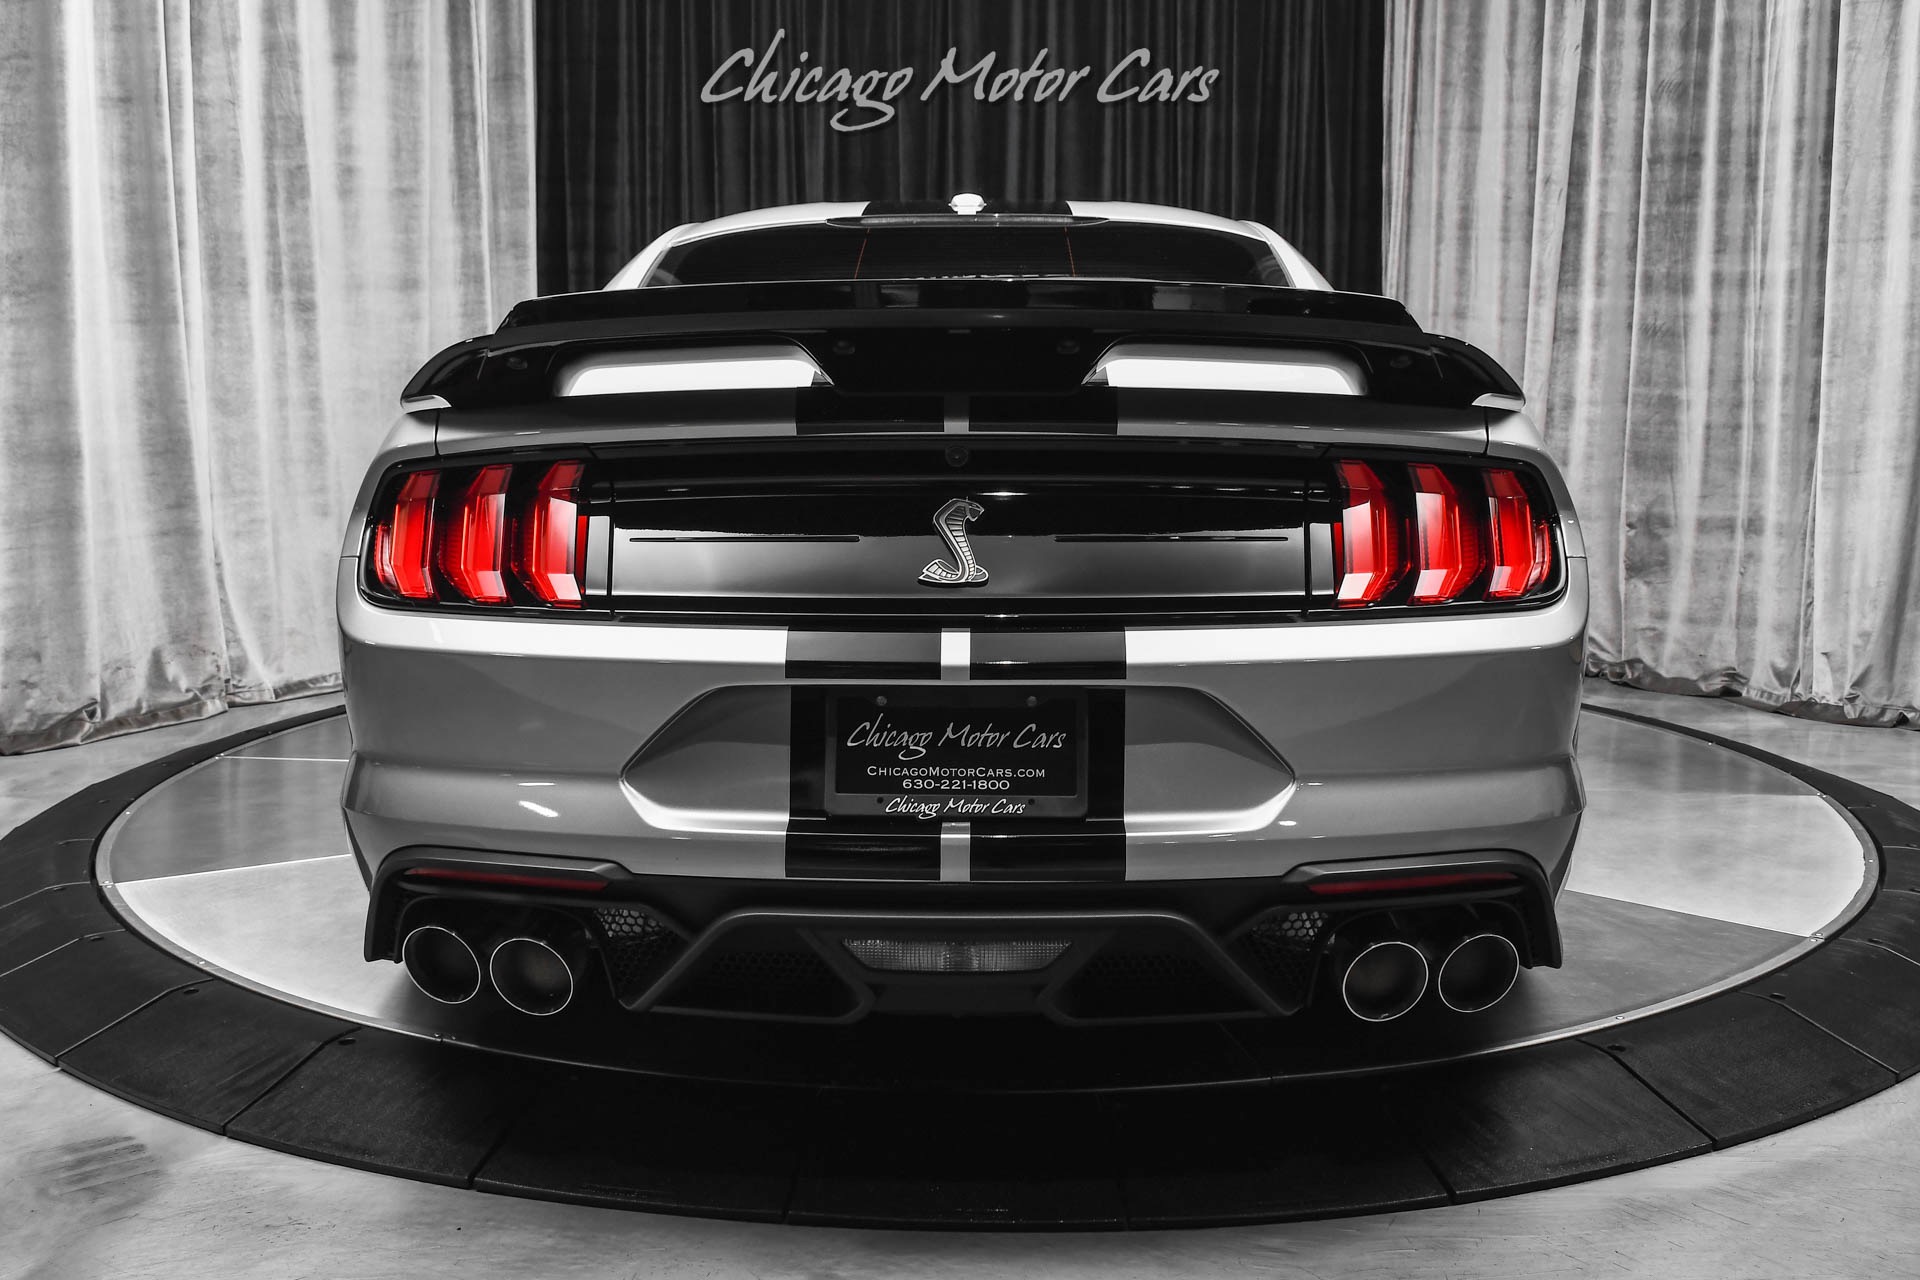 Used-2020-Ford-Mustang-Shelby-GT500-Coupe-Technology-Package-Hot-Spec-760-Horsepower